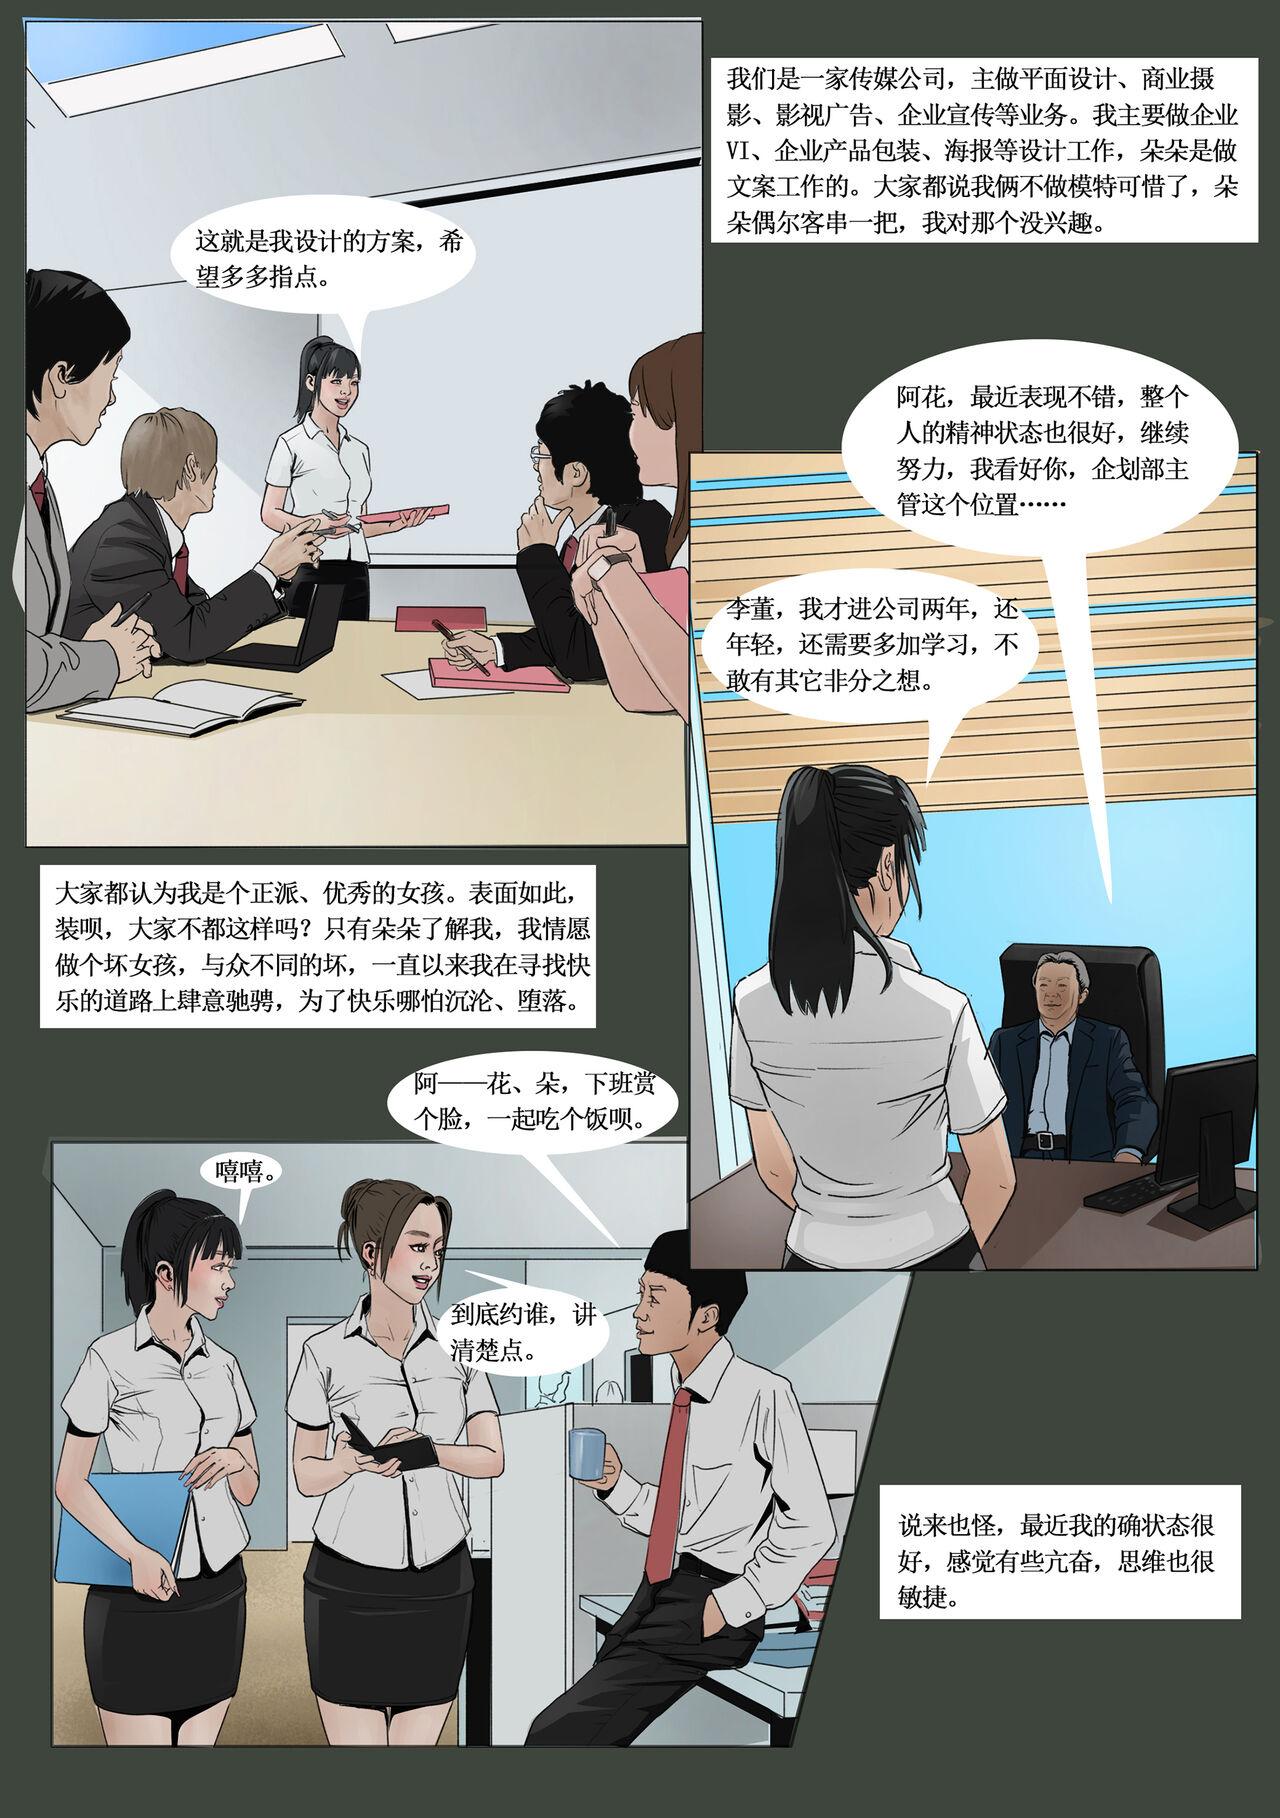 Caliente 枫语Foryou《阿花与阿朵》第二话 A hua and A duo 2 Chinese Arabe - Page 10